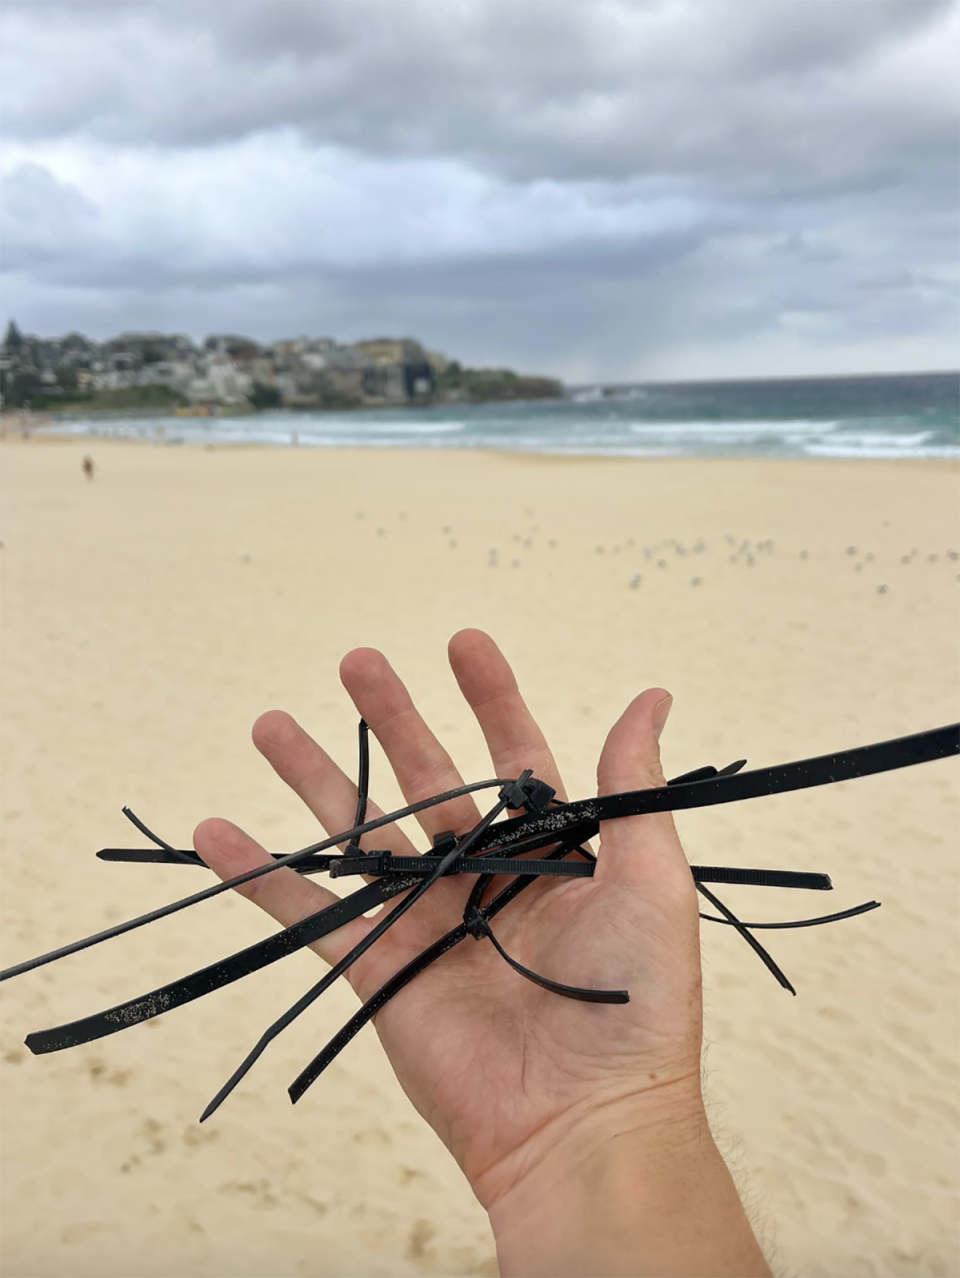 The local man standing on Bondi Beach holding a bundle of black cable ties in his hand.  